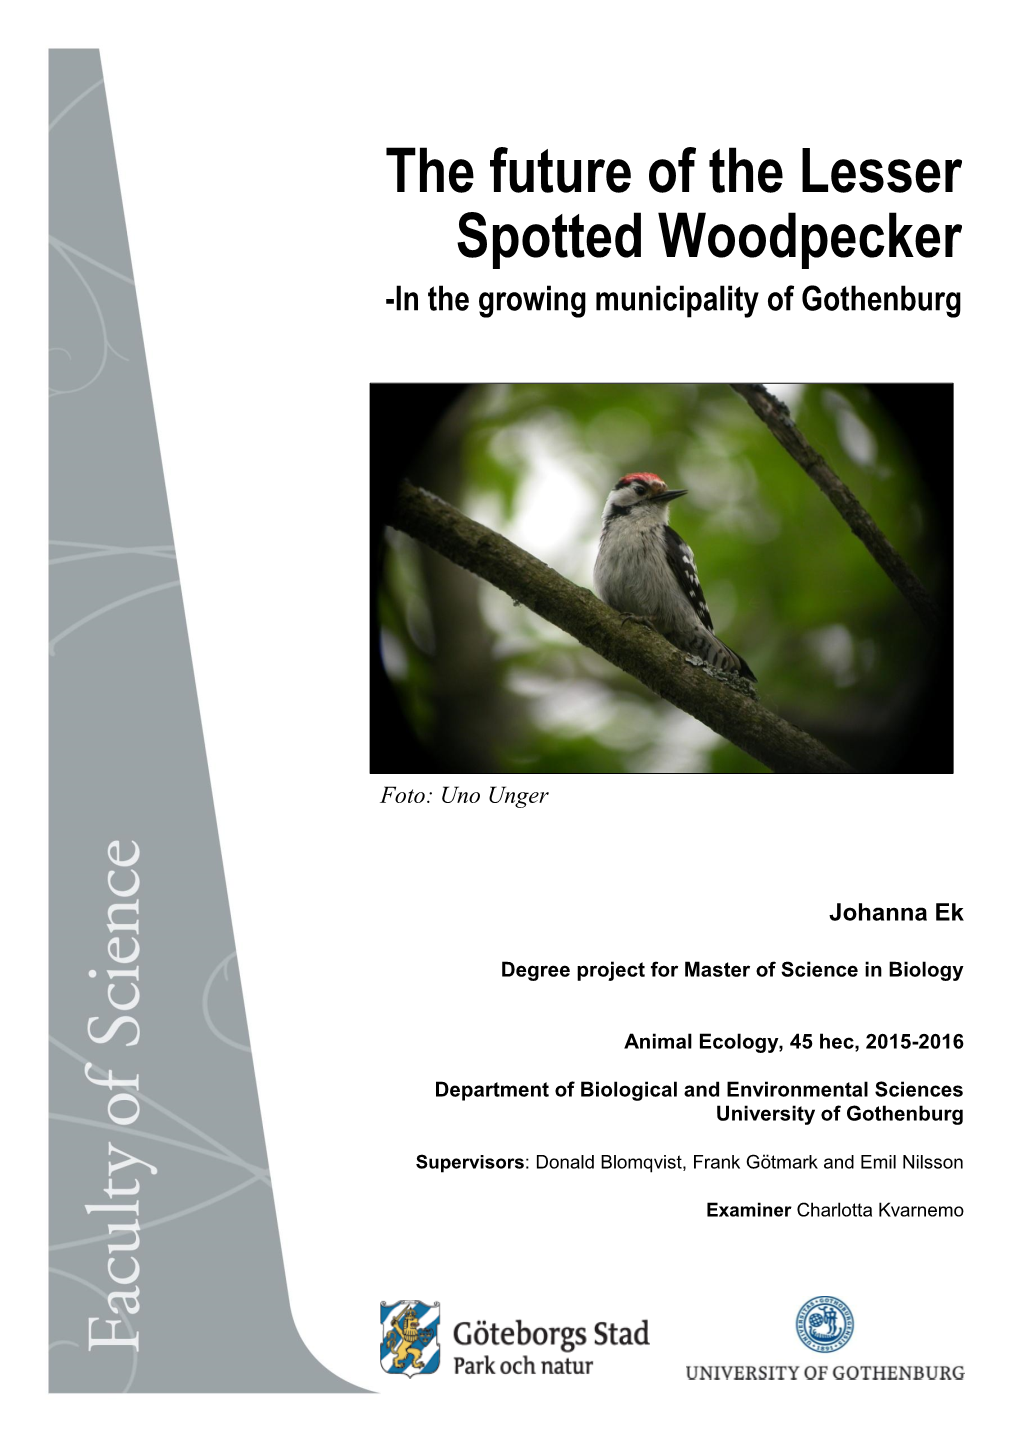 The Future of the Lesser Spotted Woodpecker -In the Growing Municipality of Gothenburg